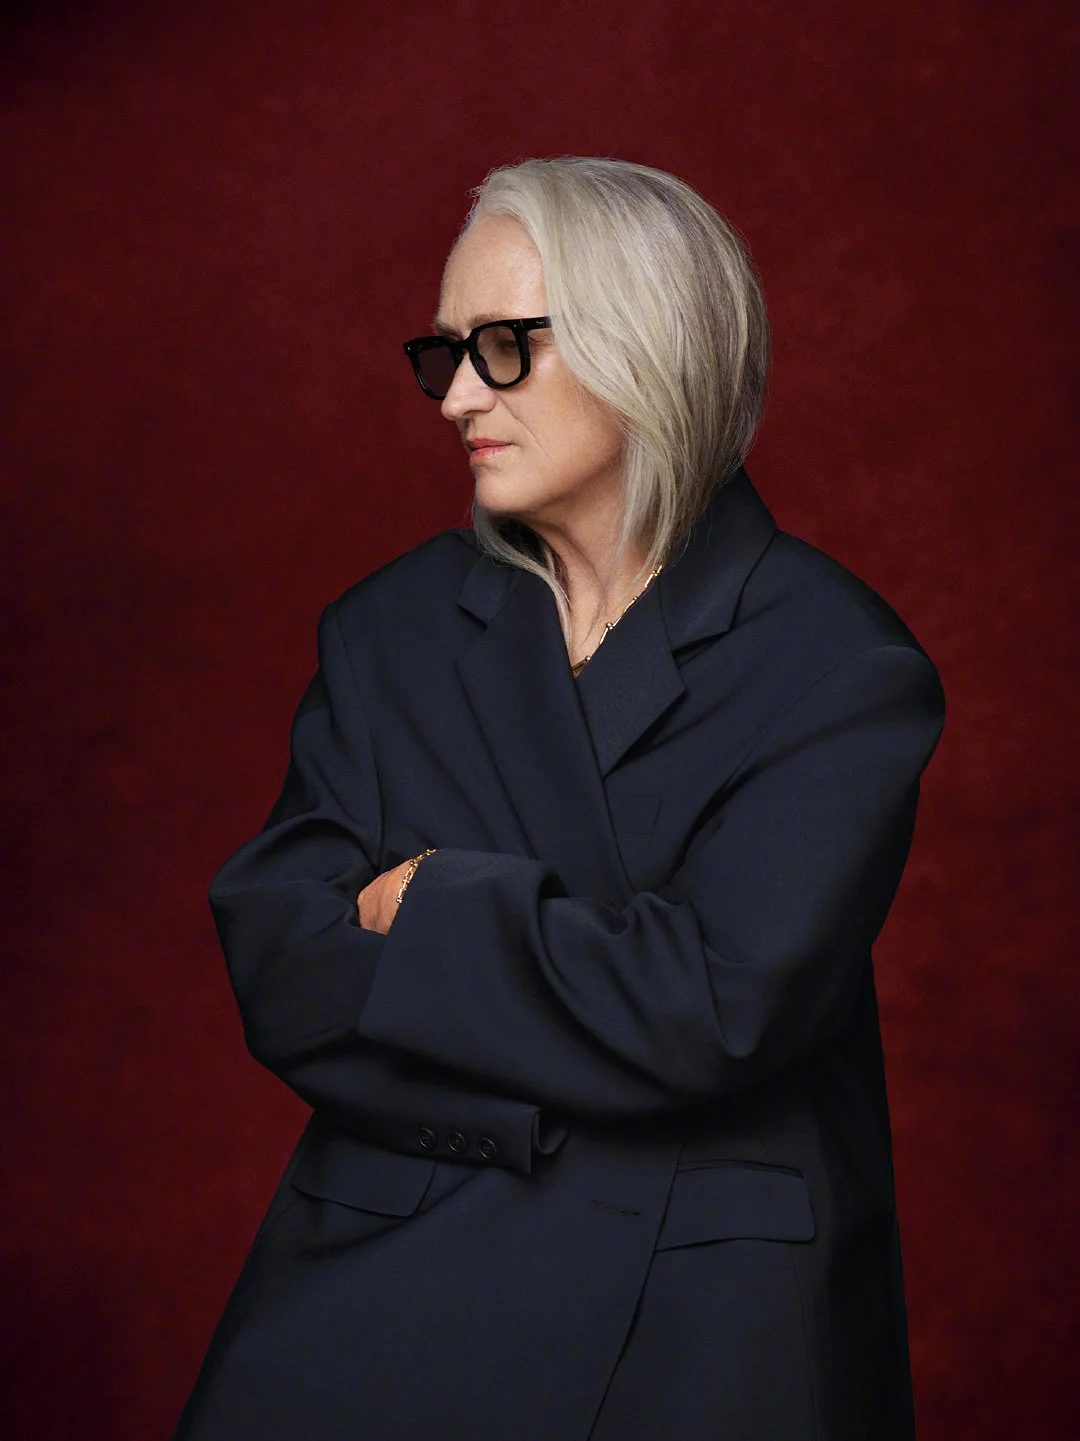 Jane Campion appeared in the "Vanity Fair" Oscar season special issue ​​​